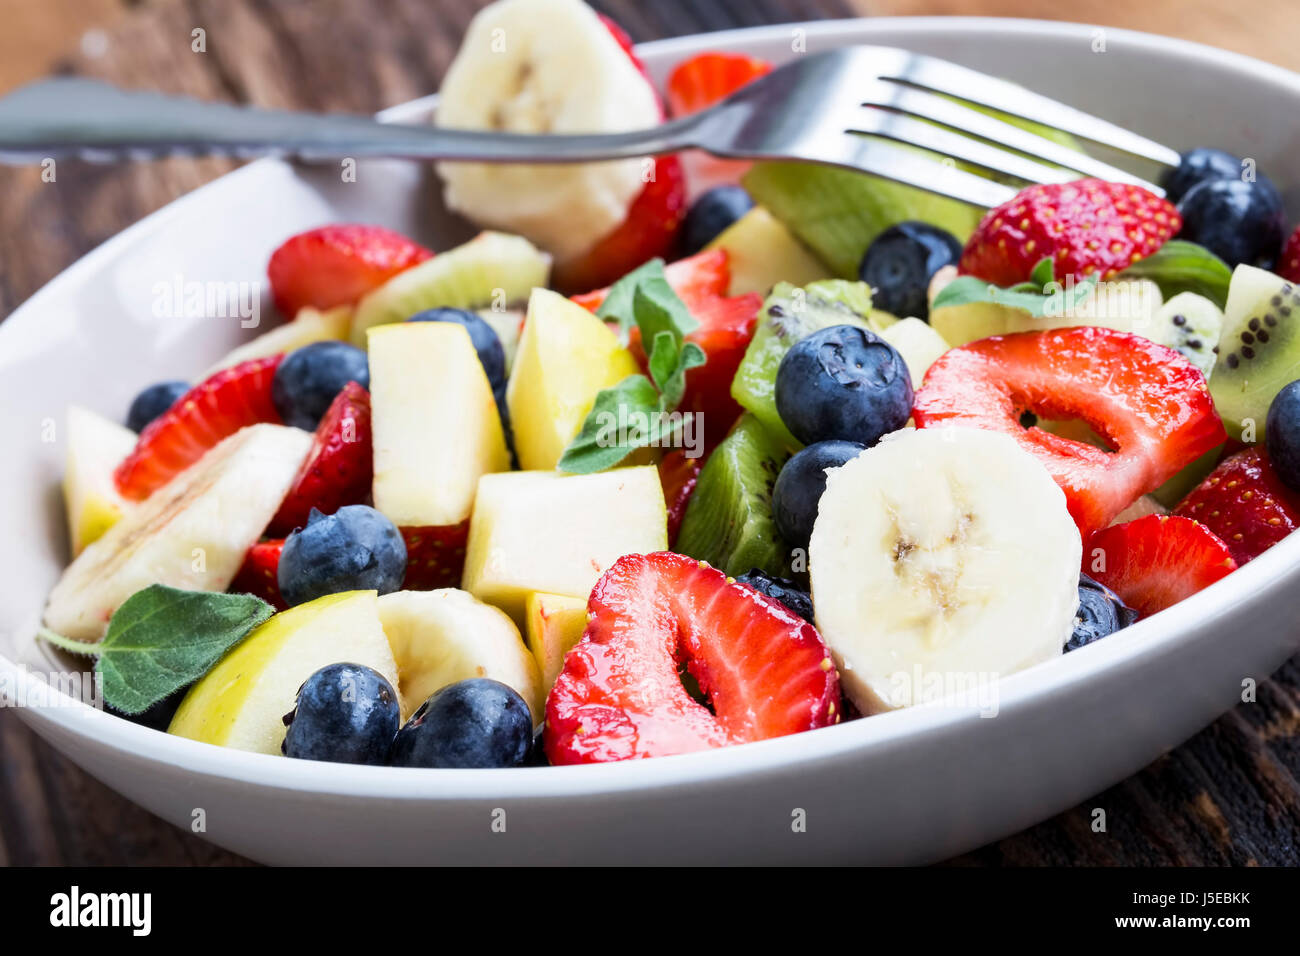 Bowl of fruits salad with strawberries, blueberries, apples, kiwi ...